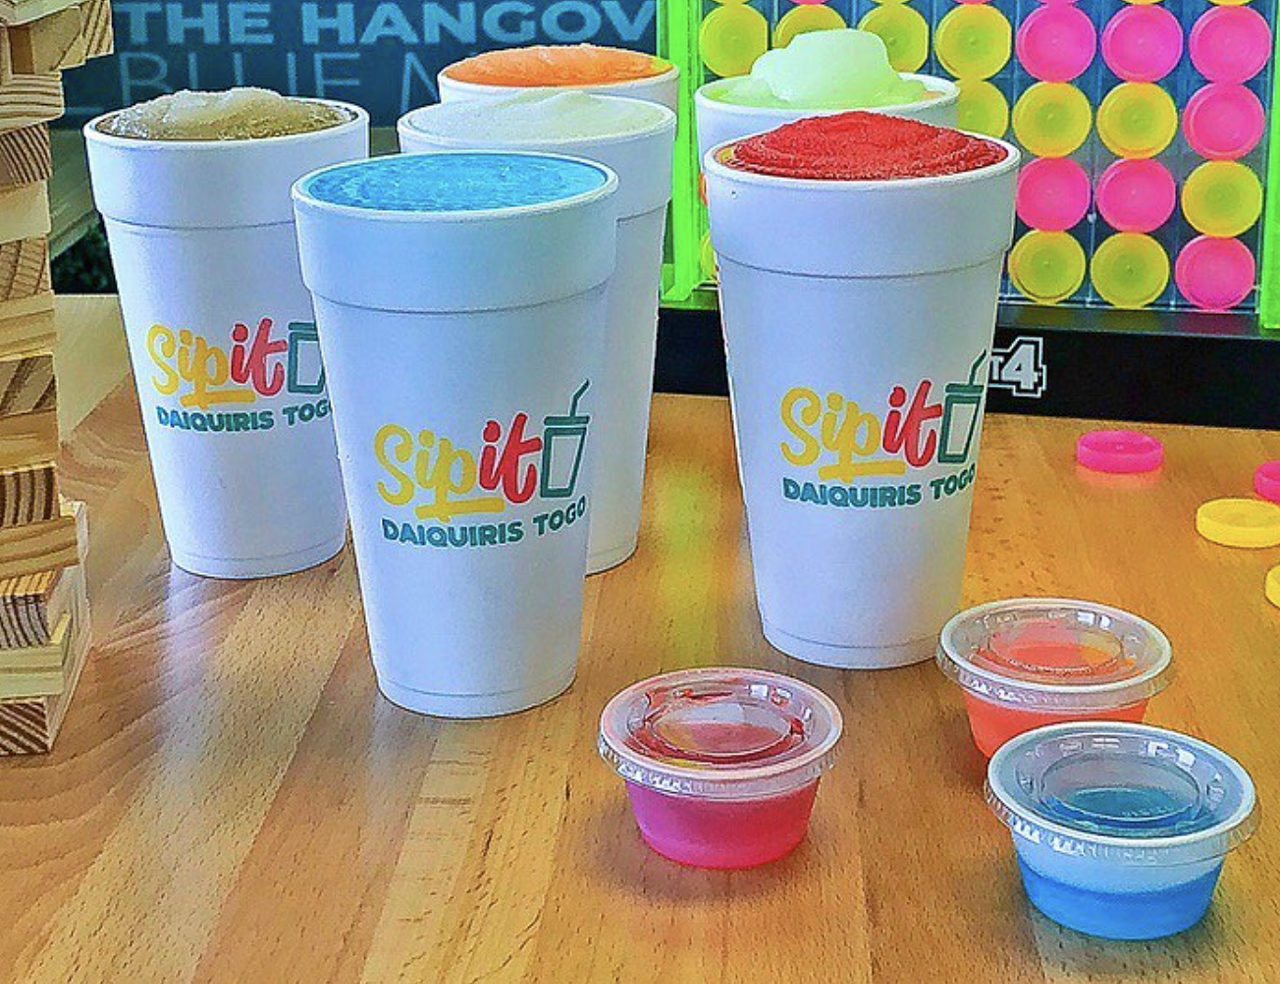 SipIt Daiquiris
1717 Pat Booker Rd, (210) 314-3112, drinksipit.com
SipIt Daiquiris just opened in January of this year, and their timing couldn’t have been better. As bars and restaurants were ordered to shut down, this booze to-go hotspot on the north side was there to cushion the fall. Gift a gallon of their Hurricane to the most nostalgic in your circle… it tastes like Hawaiian Punch!
Photo via Instagram 
sipitdaiquiris